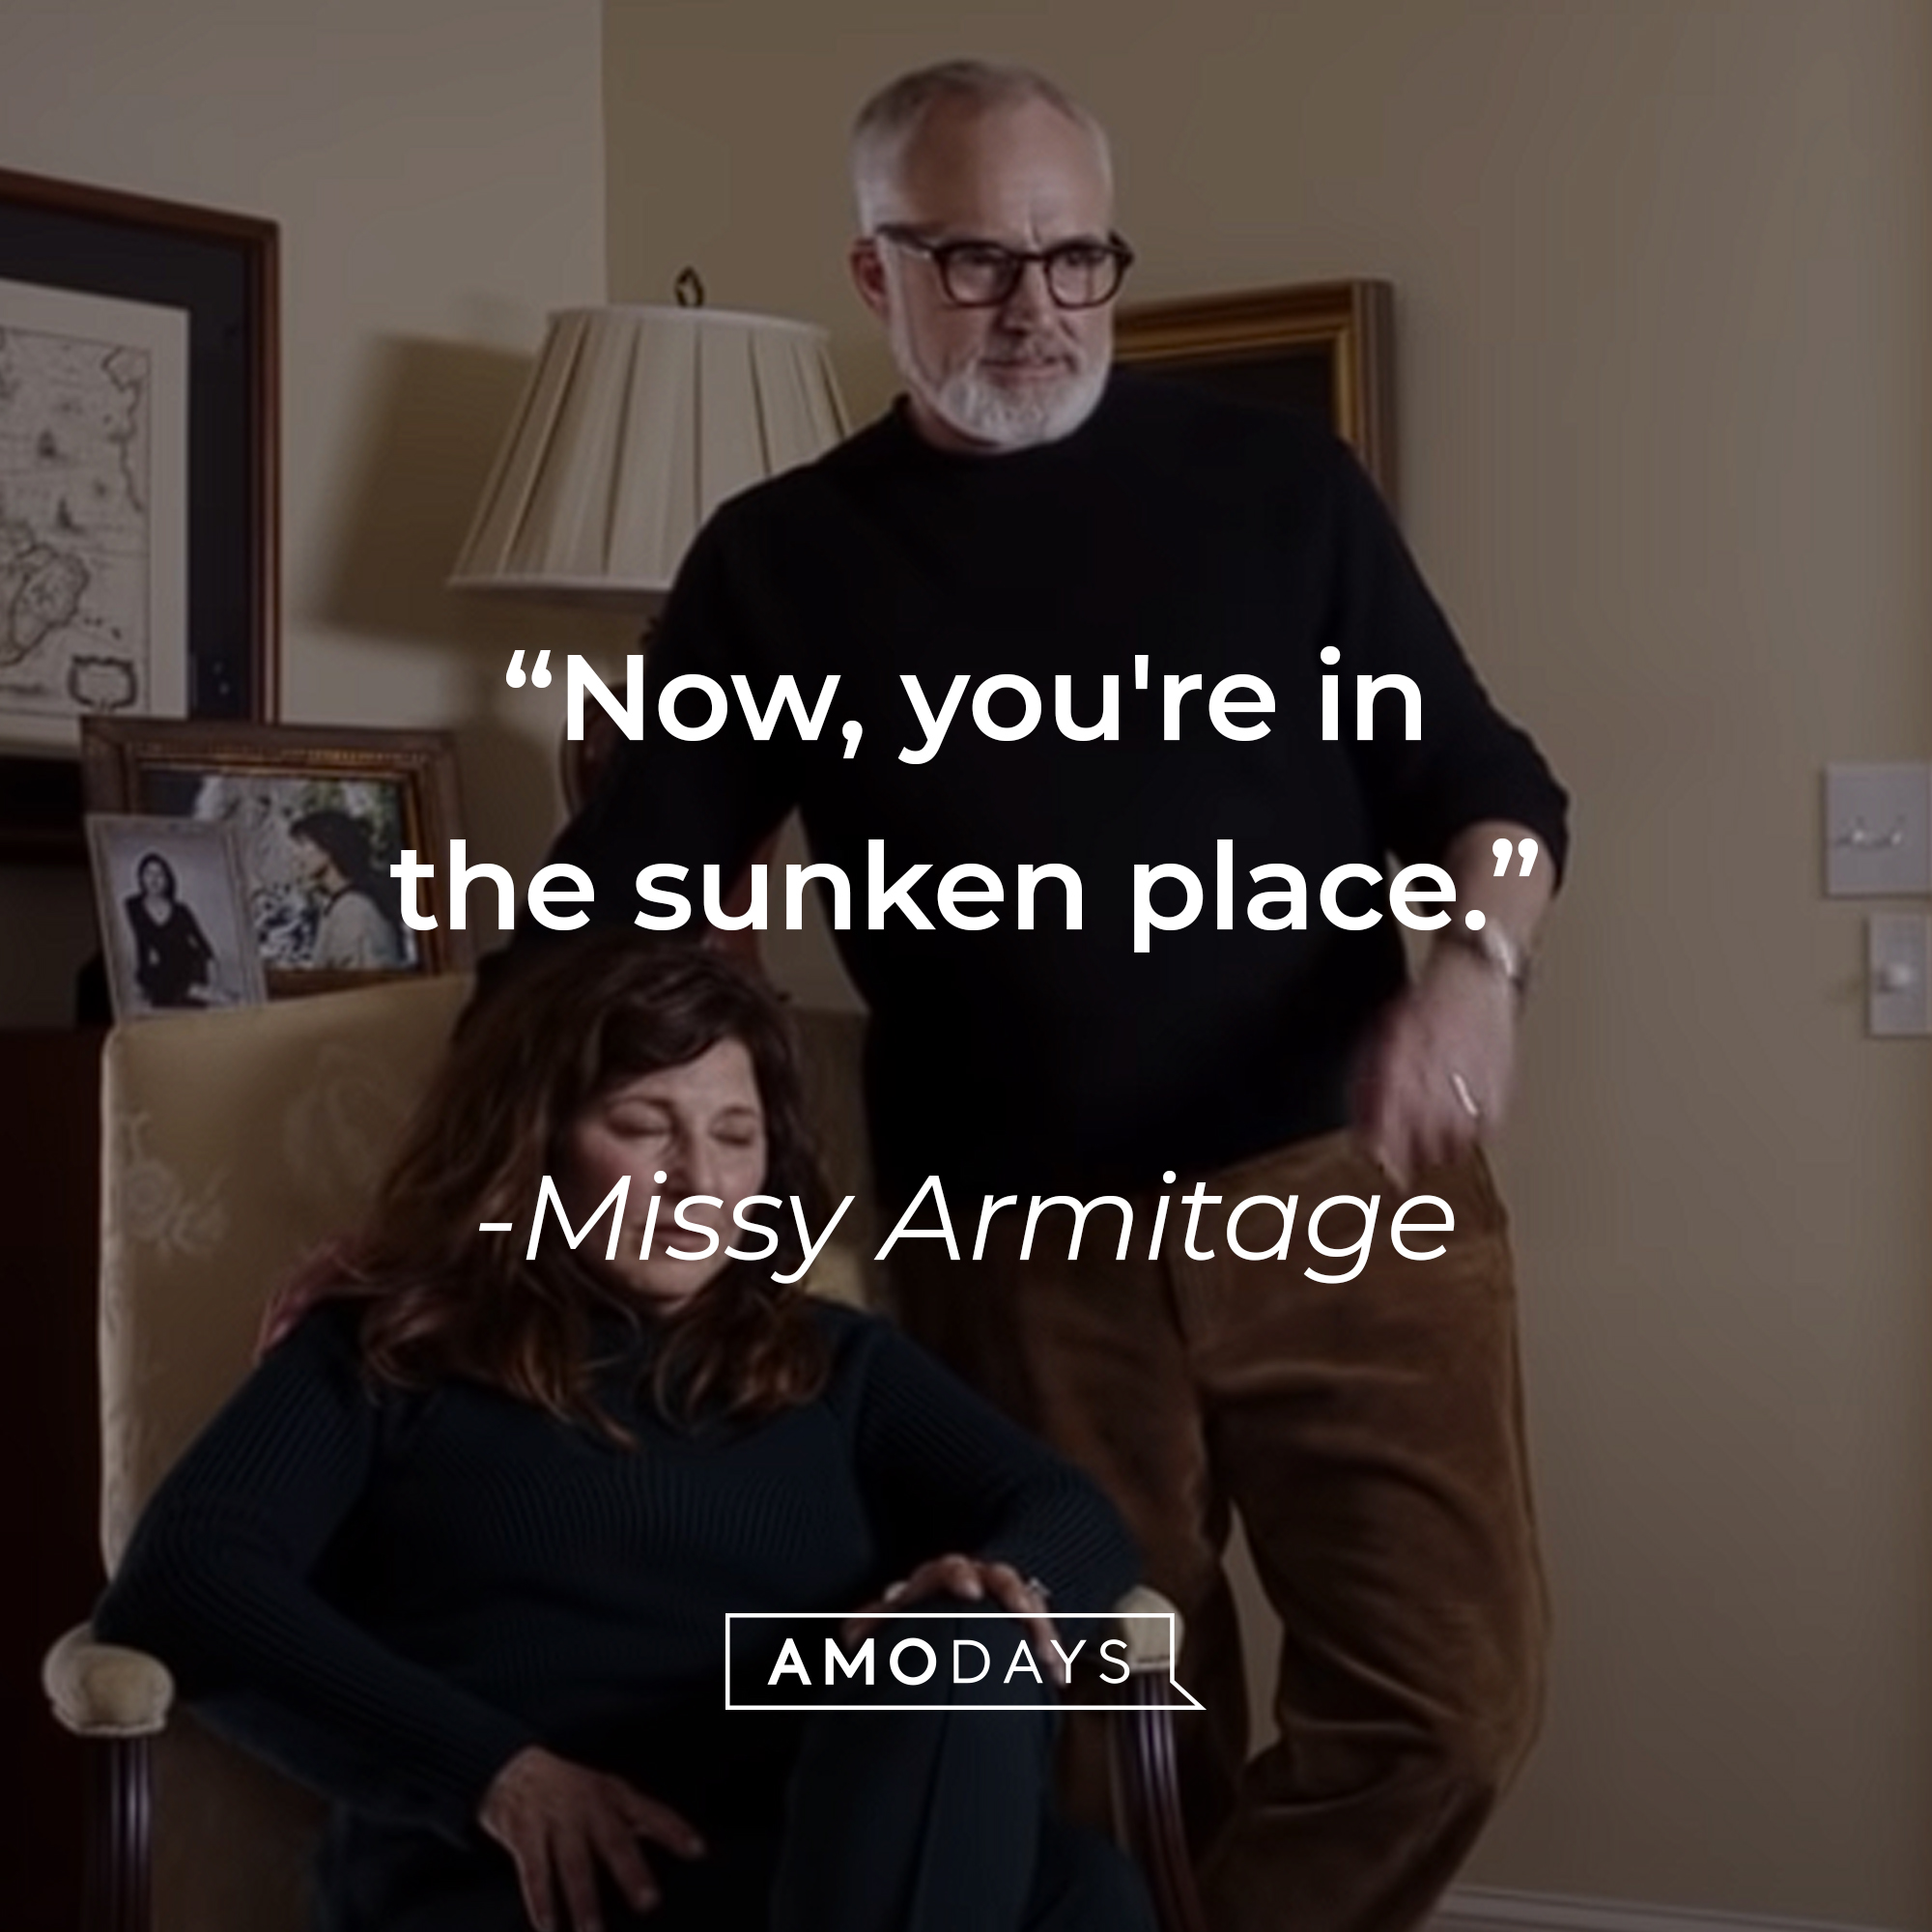 An image of Missy and Dean Armitage with Missy’s quote: "Now, you're in the sunken place." | Source: youtube.com/UniversalpicturesIta